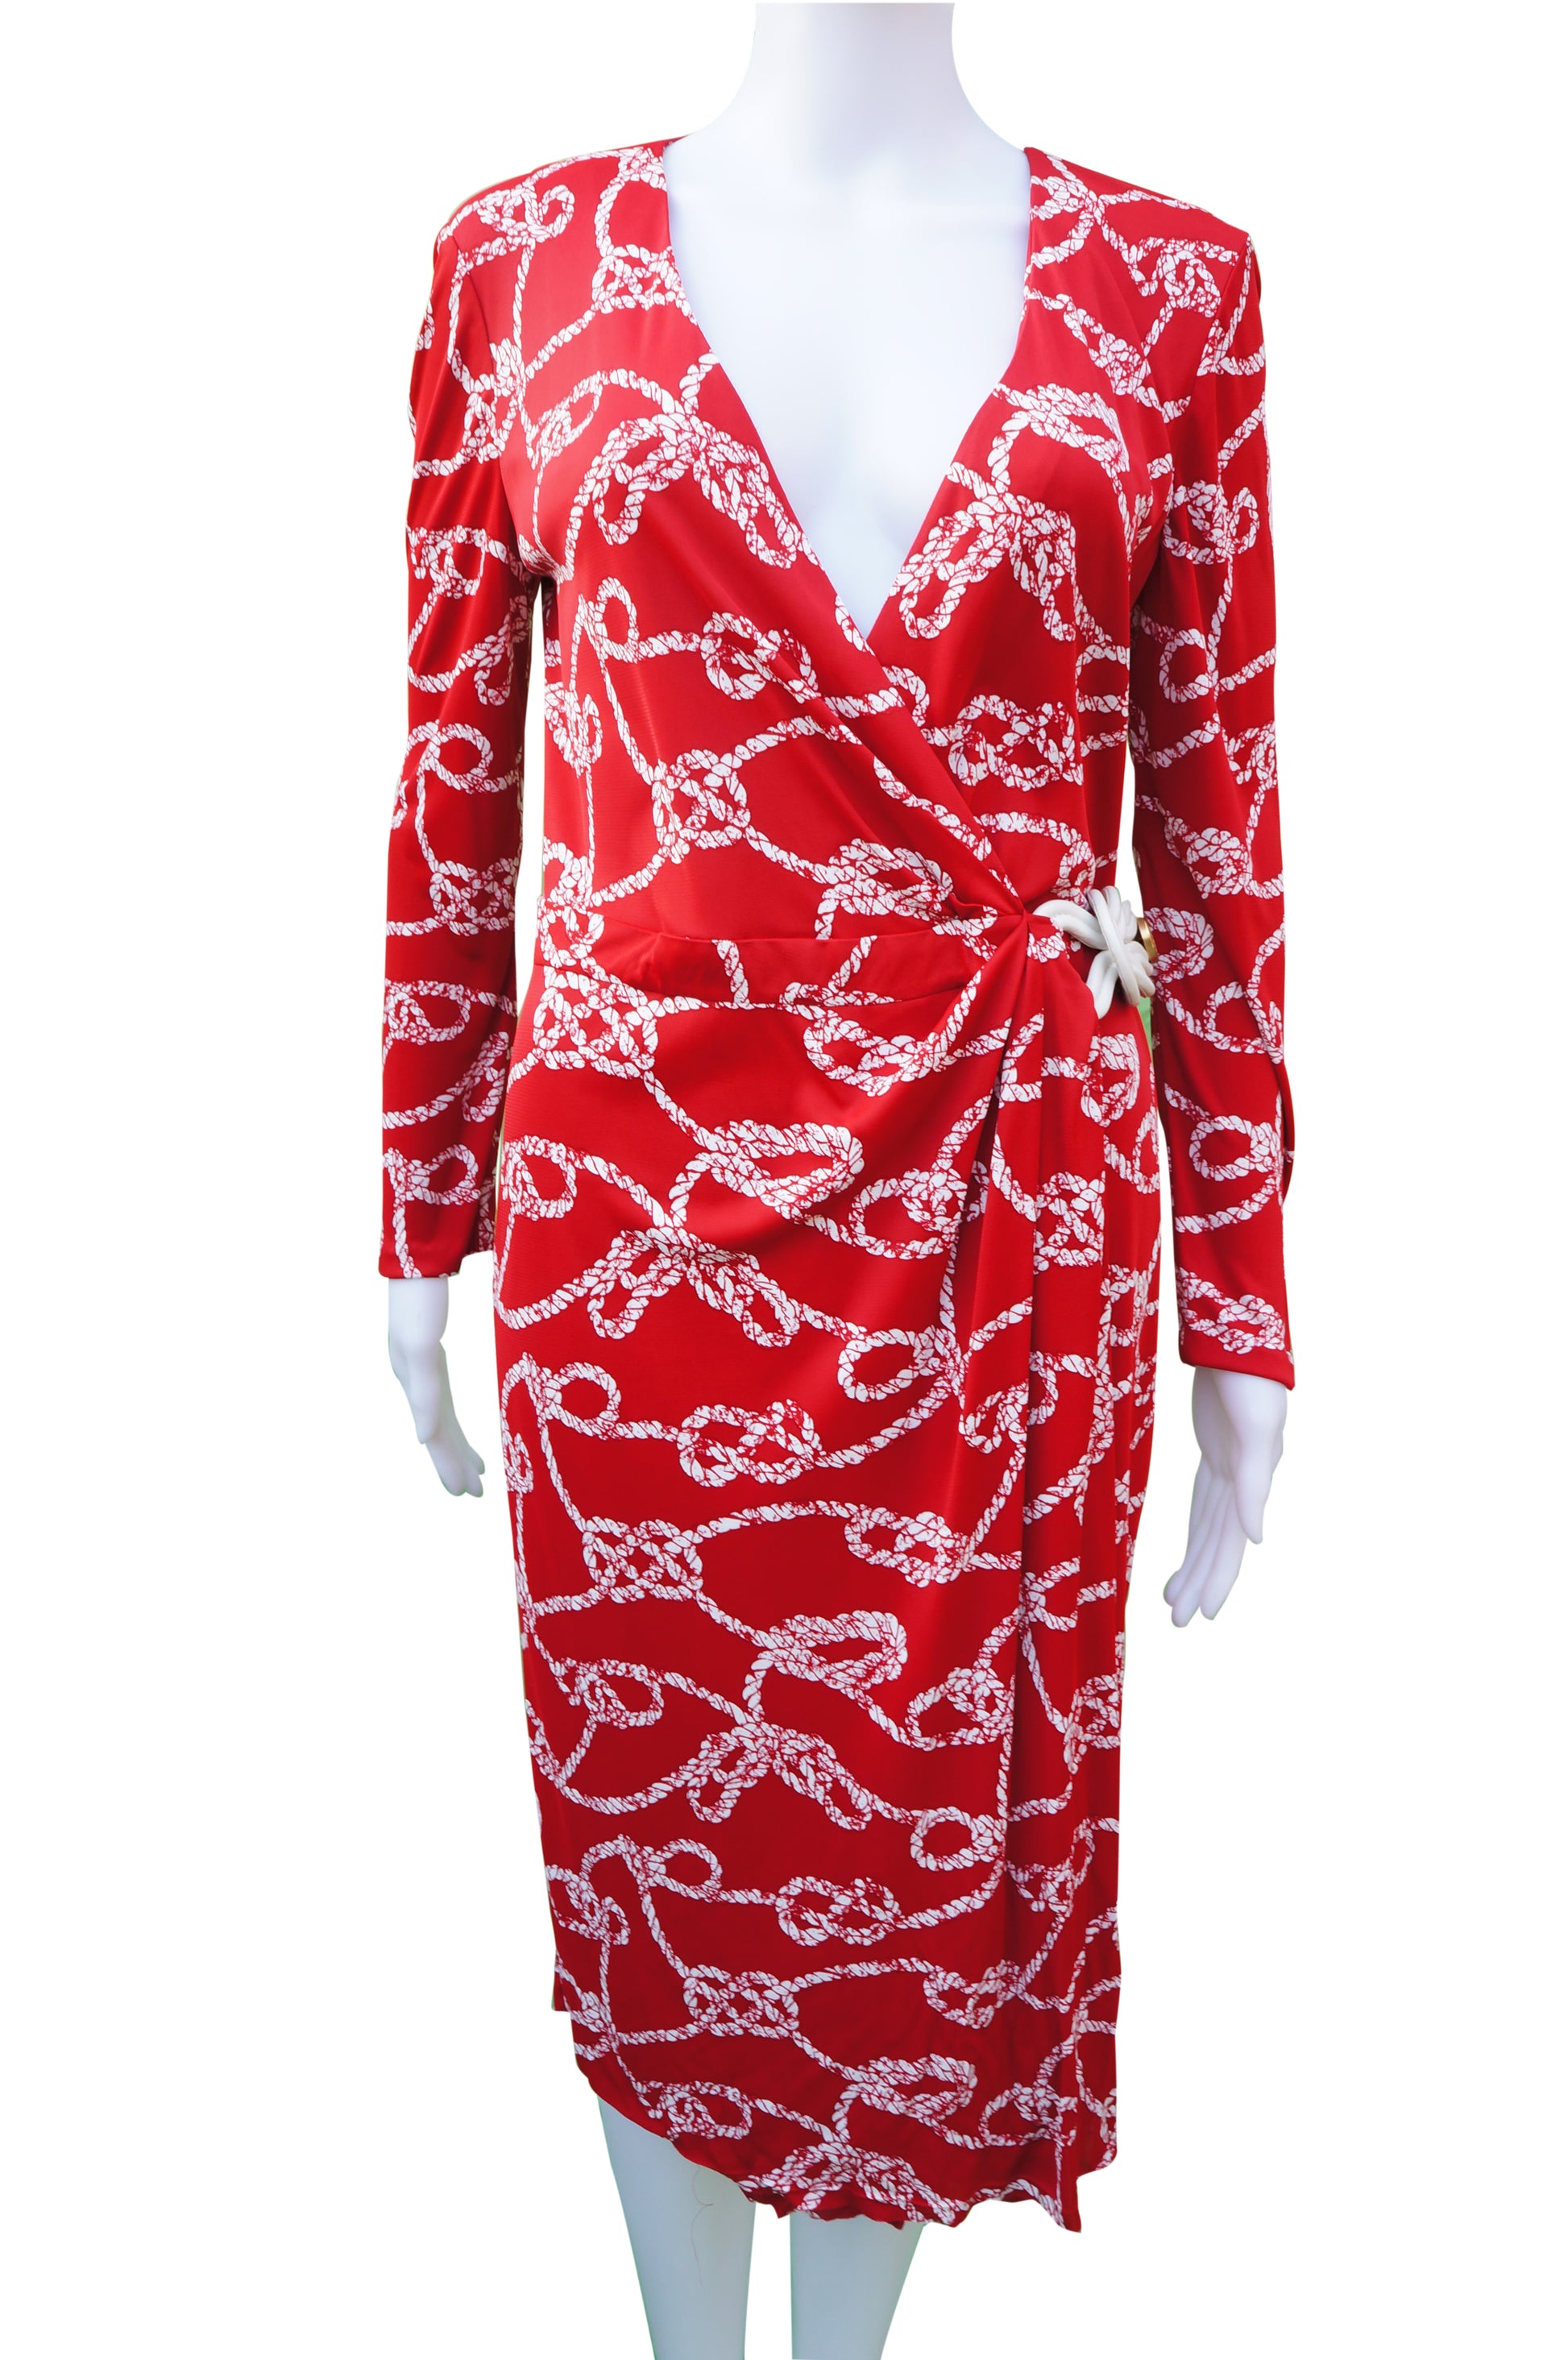 Gucci Wrap Red Rope Print Dress Long Sleeve Leather Tie - leefluxury.com